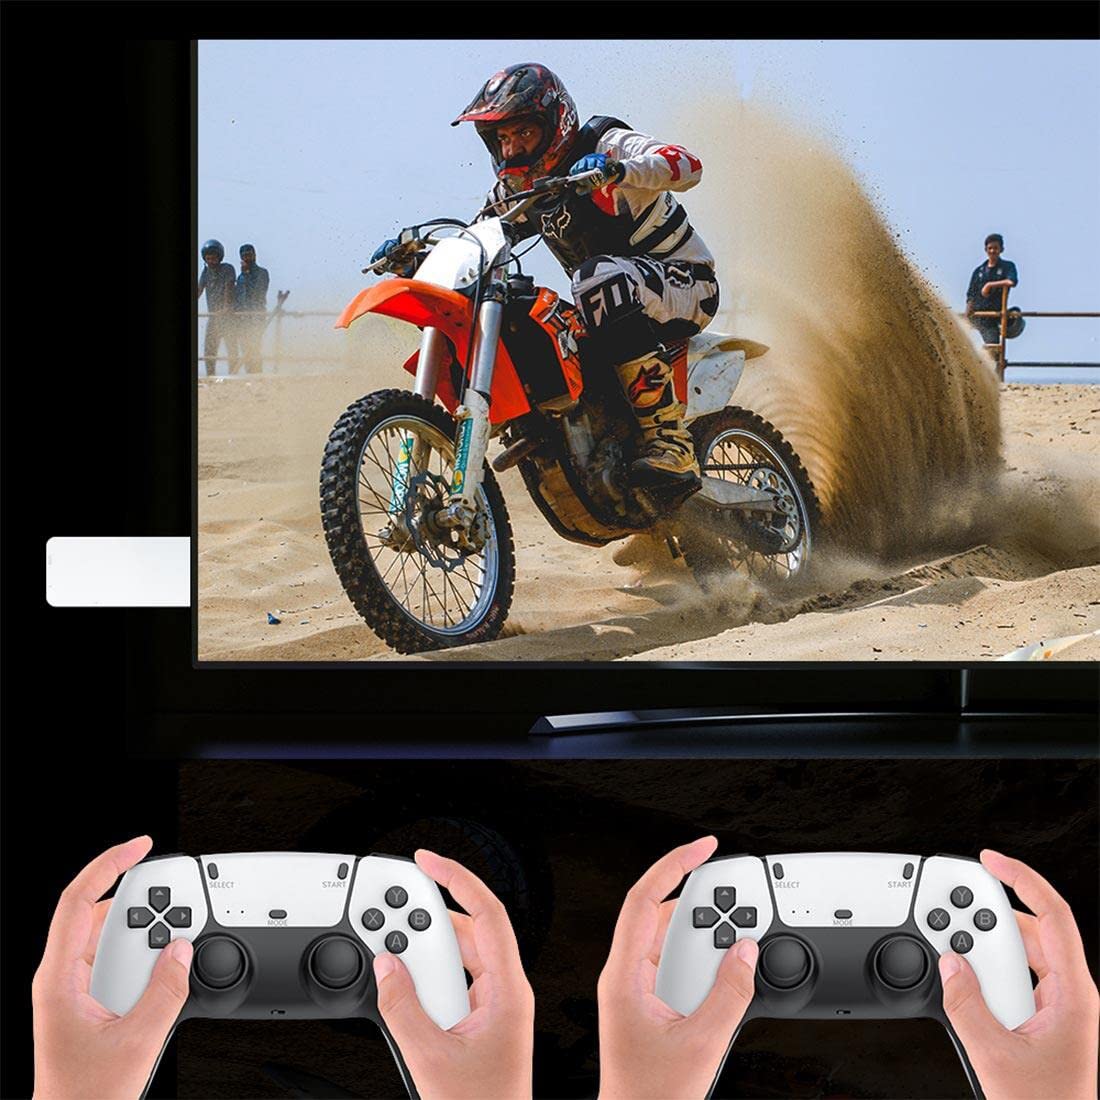 Newcomer M15 Game Stick, Retro Handheld Game Console with 19,000 Games, HD 4K 64G Plug and Play Video Games for TV